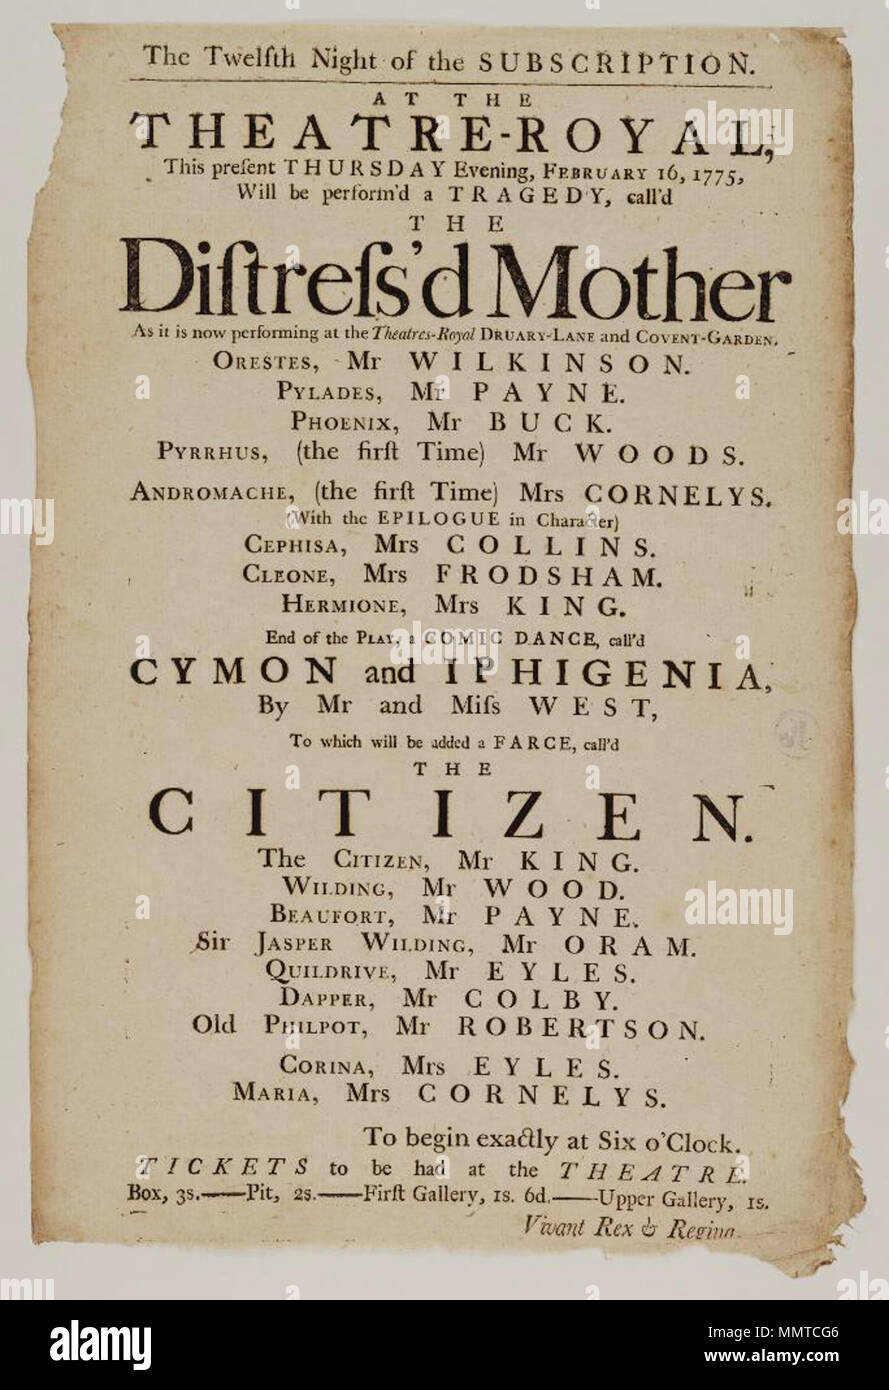 . Playbill of Theatre Royal, Thursday evening, February 16, 1775, announcing The distres'd mother &c.; Distres'd mother; Cymon and Iphigenia; Citizen; [Playbill of Theatre Royal, Thursday evening, February 16, 1775, announcing The distres'd mother &c.]  [Playbill of Theatre Royal, Thursday evening, February 16, 1775, announcing The distres'd mother &c.]. 16 February 1775. Theatre Royal ([York?], England) [author] Bodleian Libraries, Playbill of Theatre Royal, Thursday evening, February 16, 1775, announcing The distres'd mother &amp;c. Stock Photo